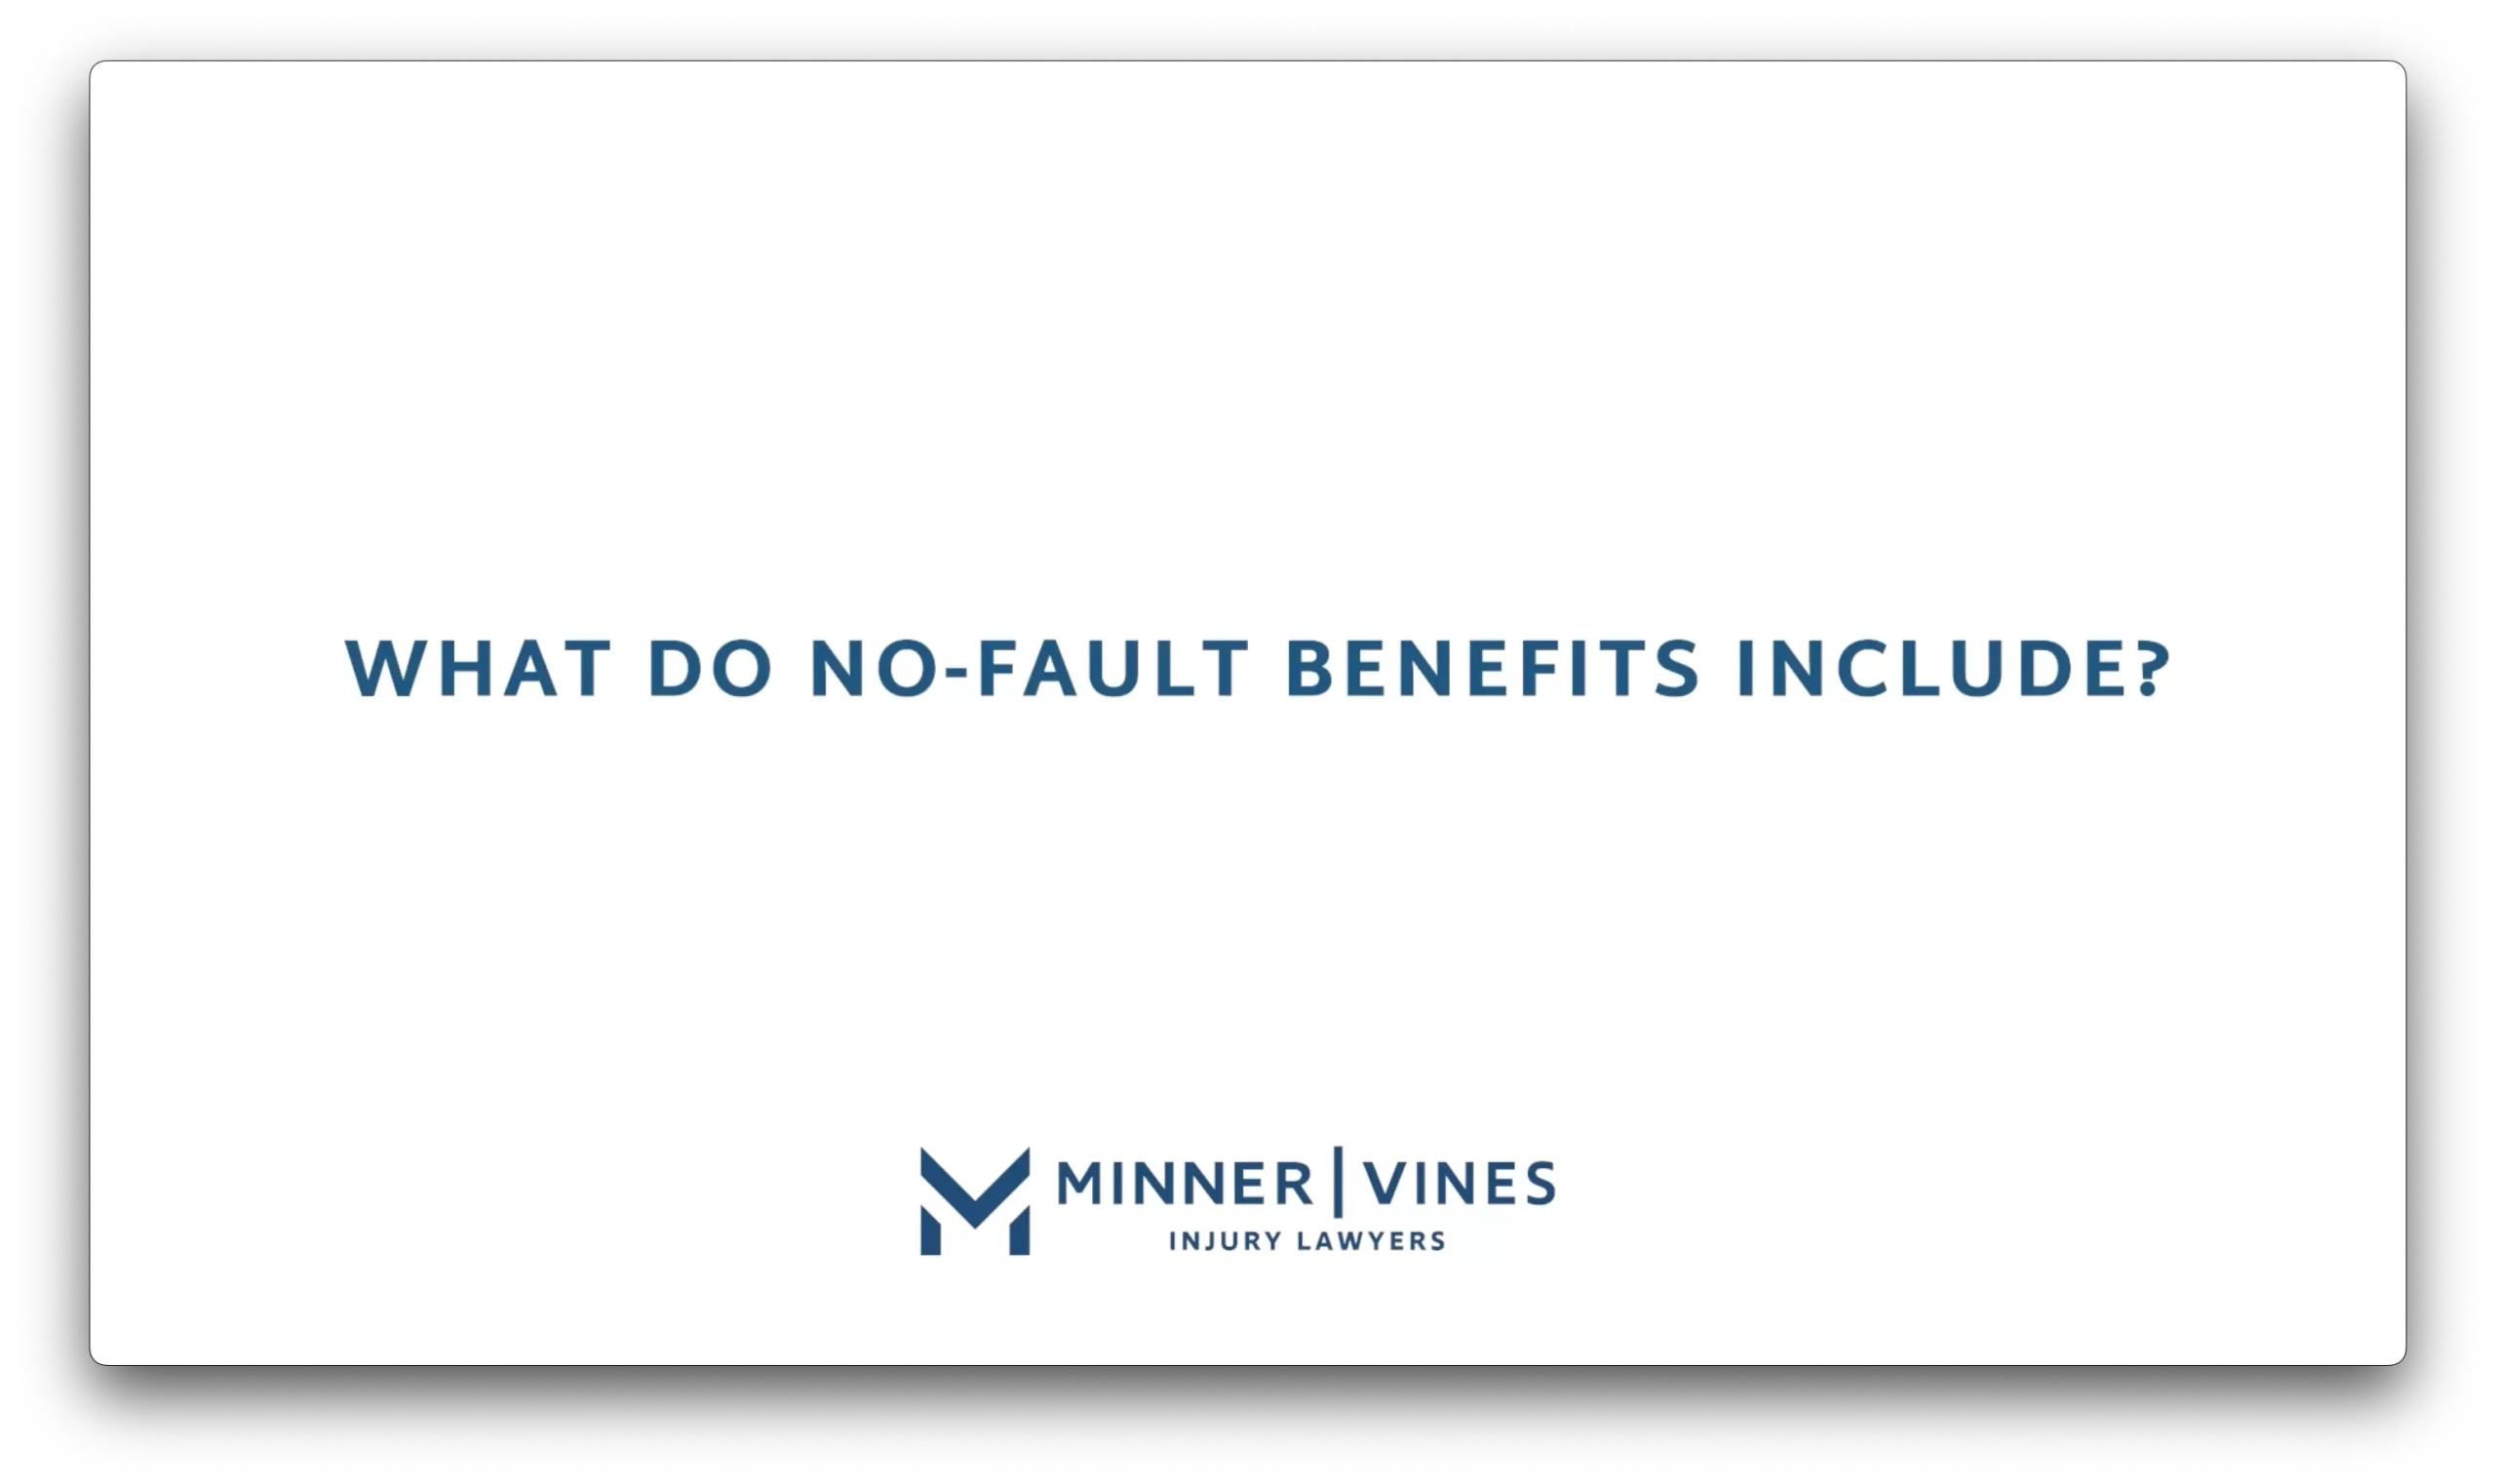 What do no-fault benefits include?